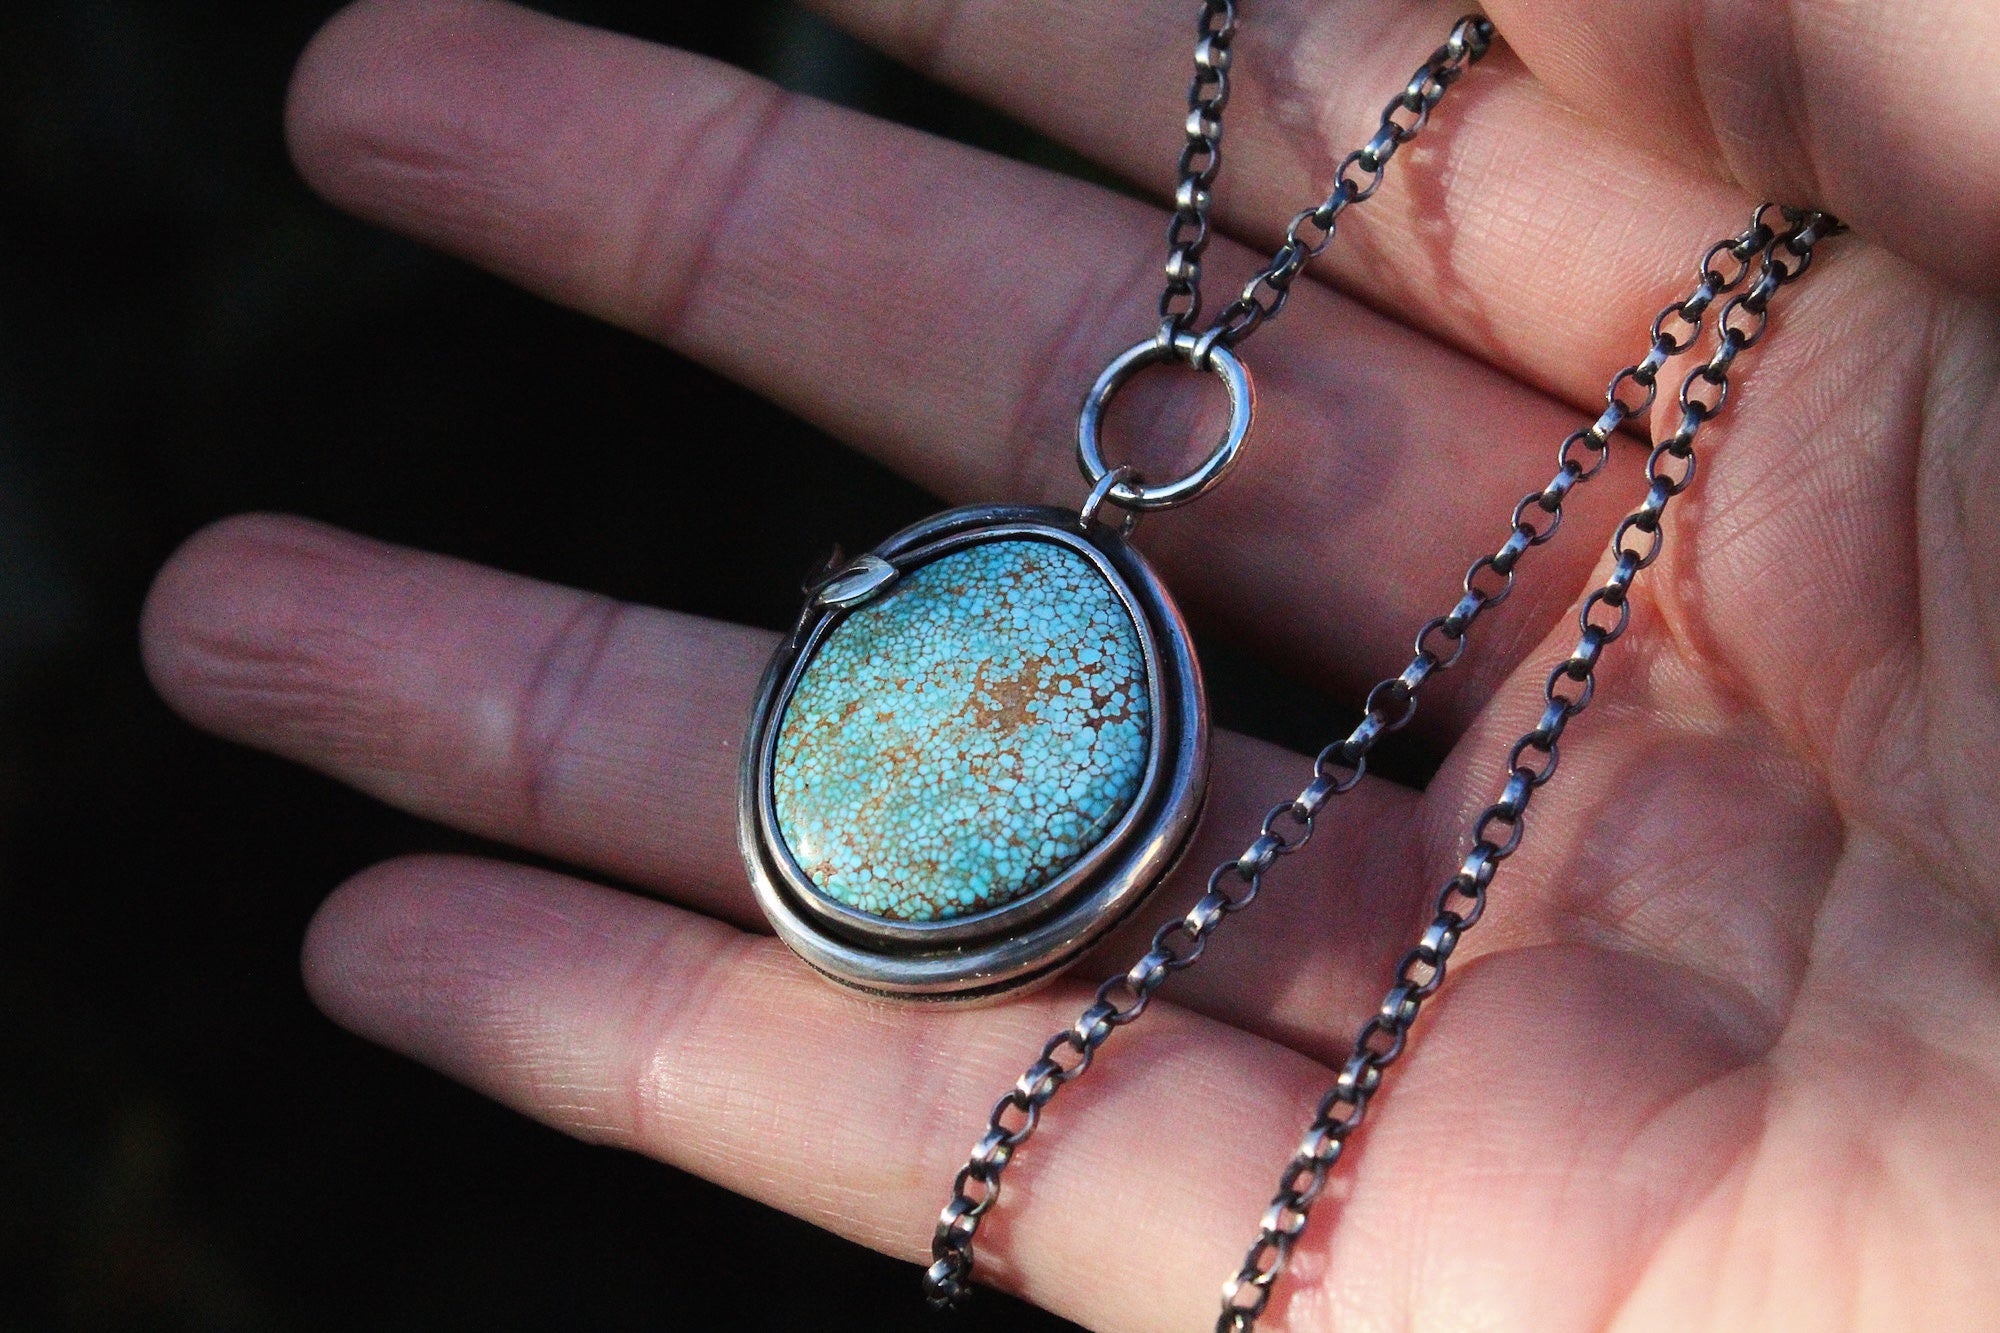 RISING LIFE Handmade Sterling Silver Necklace with No. 8 Turquoise